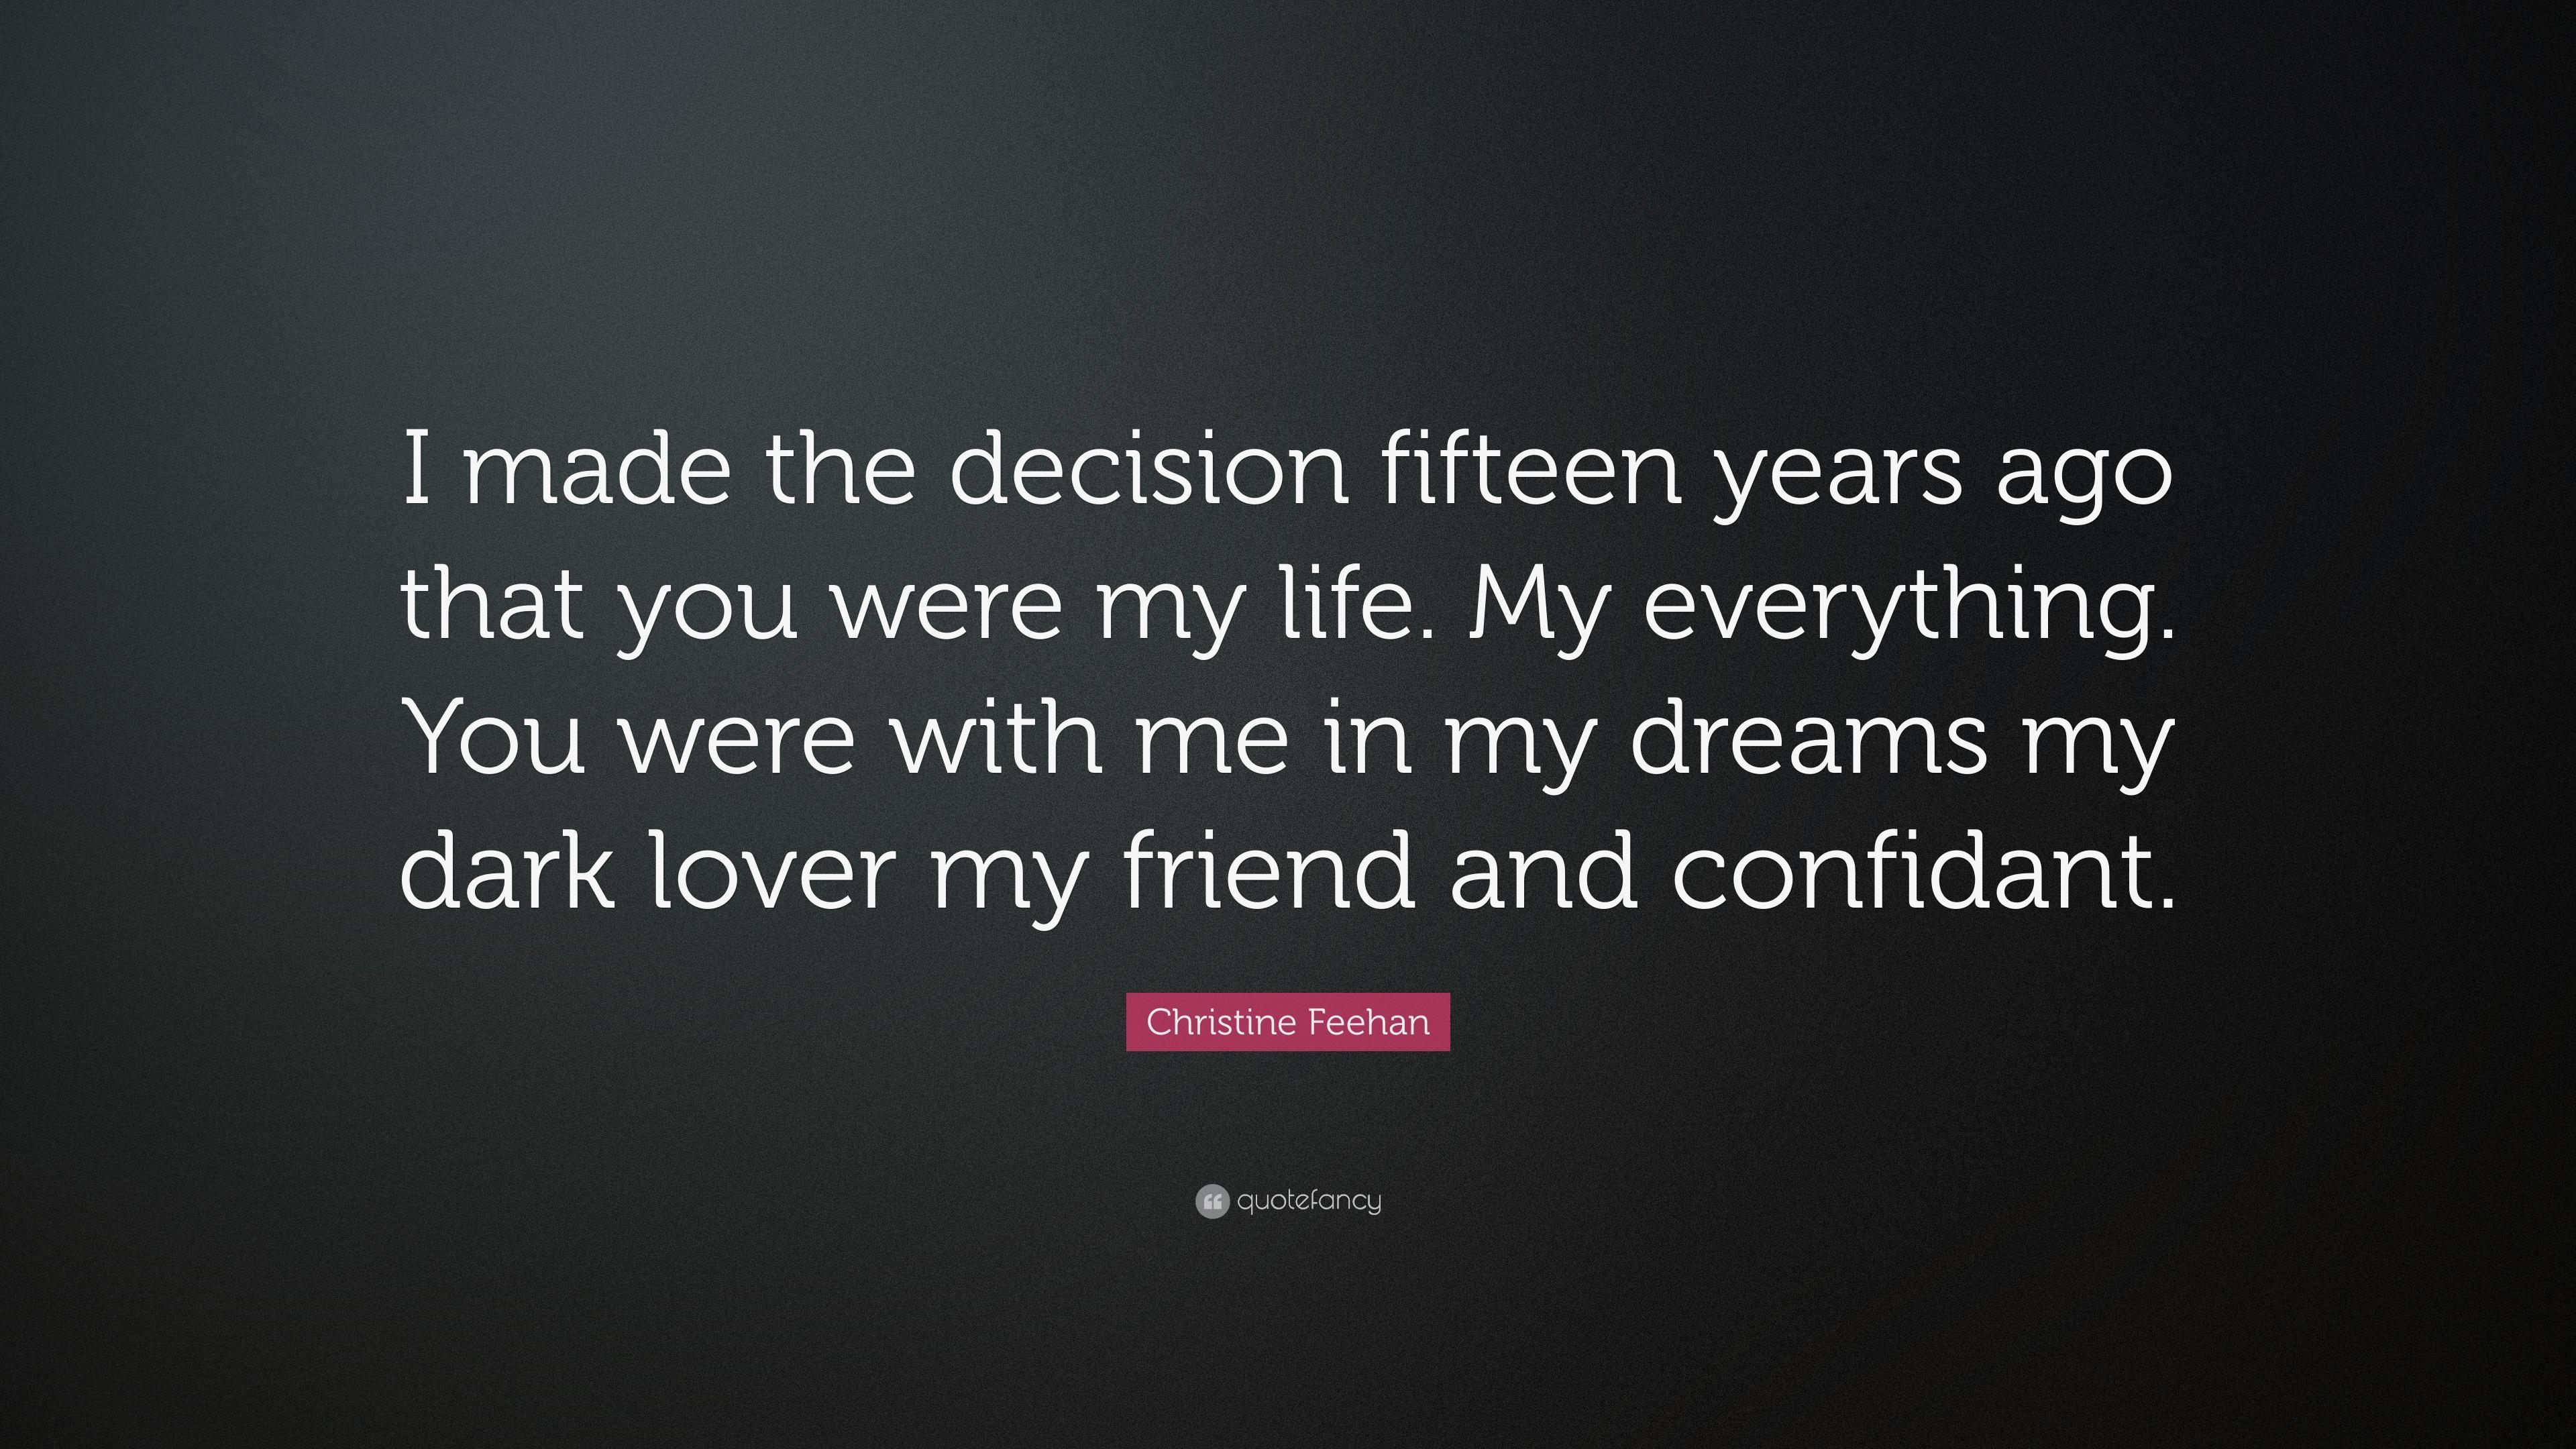 Christine Feehan Quote: “I made the decision fifteen years